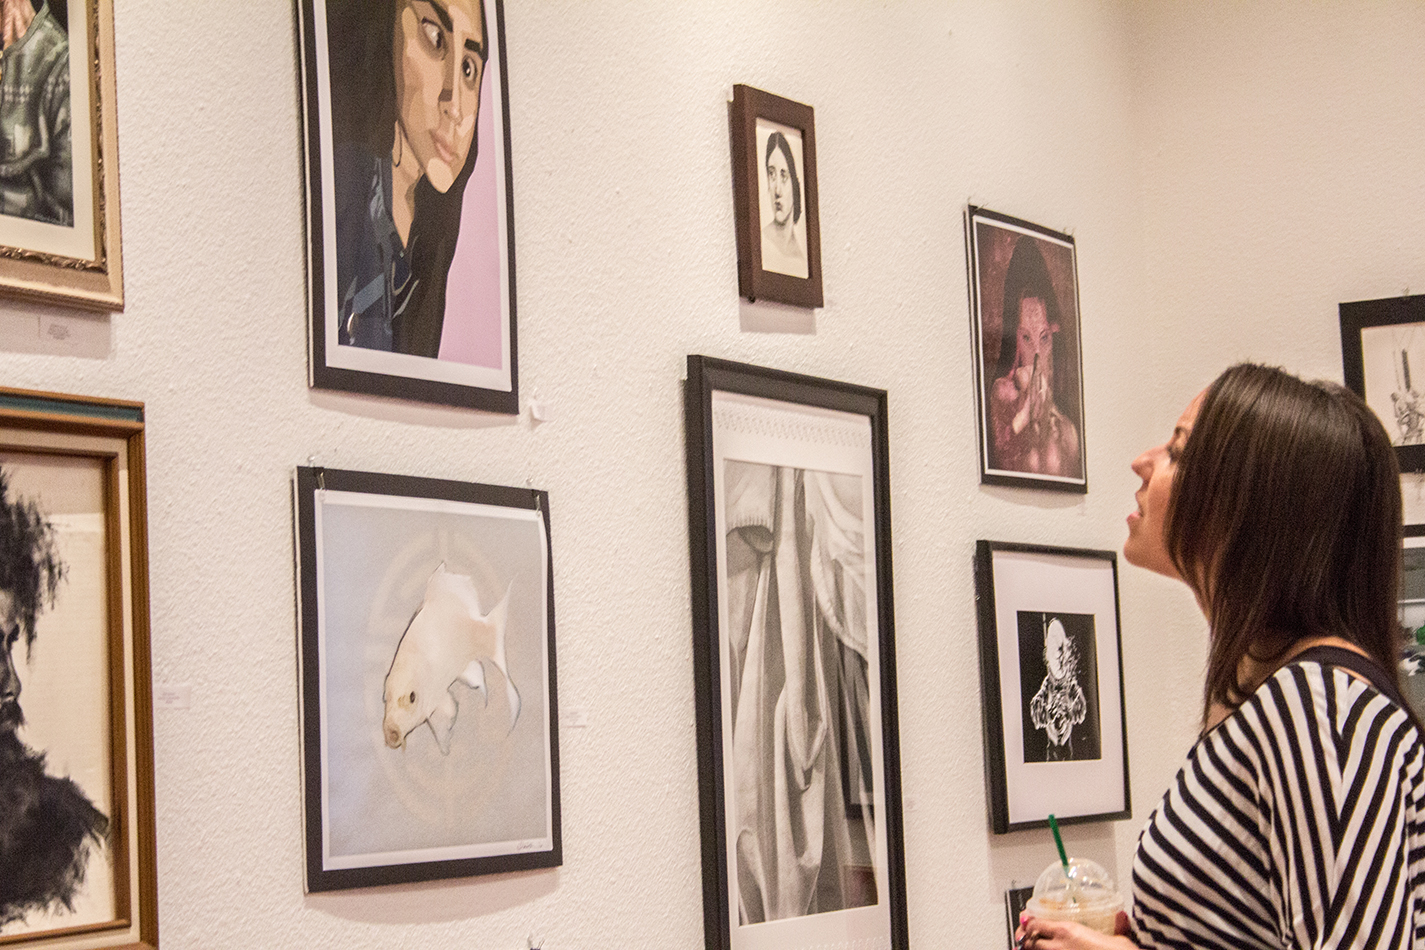 South student Nicole Harris looks at works during the closing reception of the Student Art Show April 26 in the SPAC Carillon gallery on South Campus.